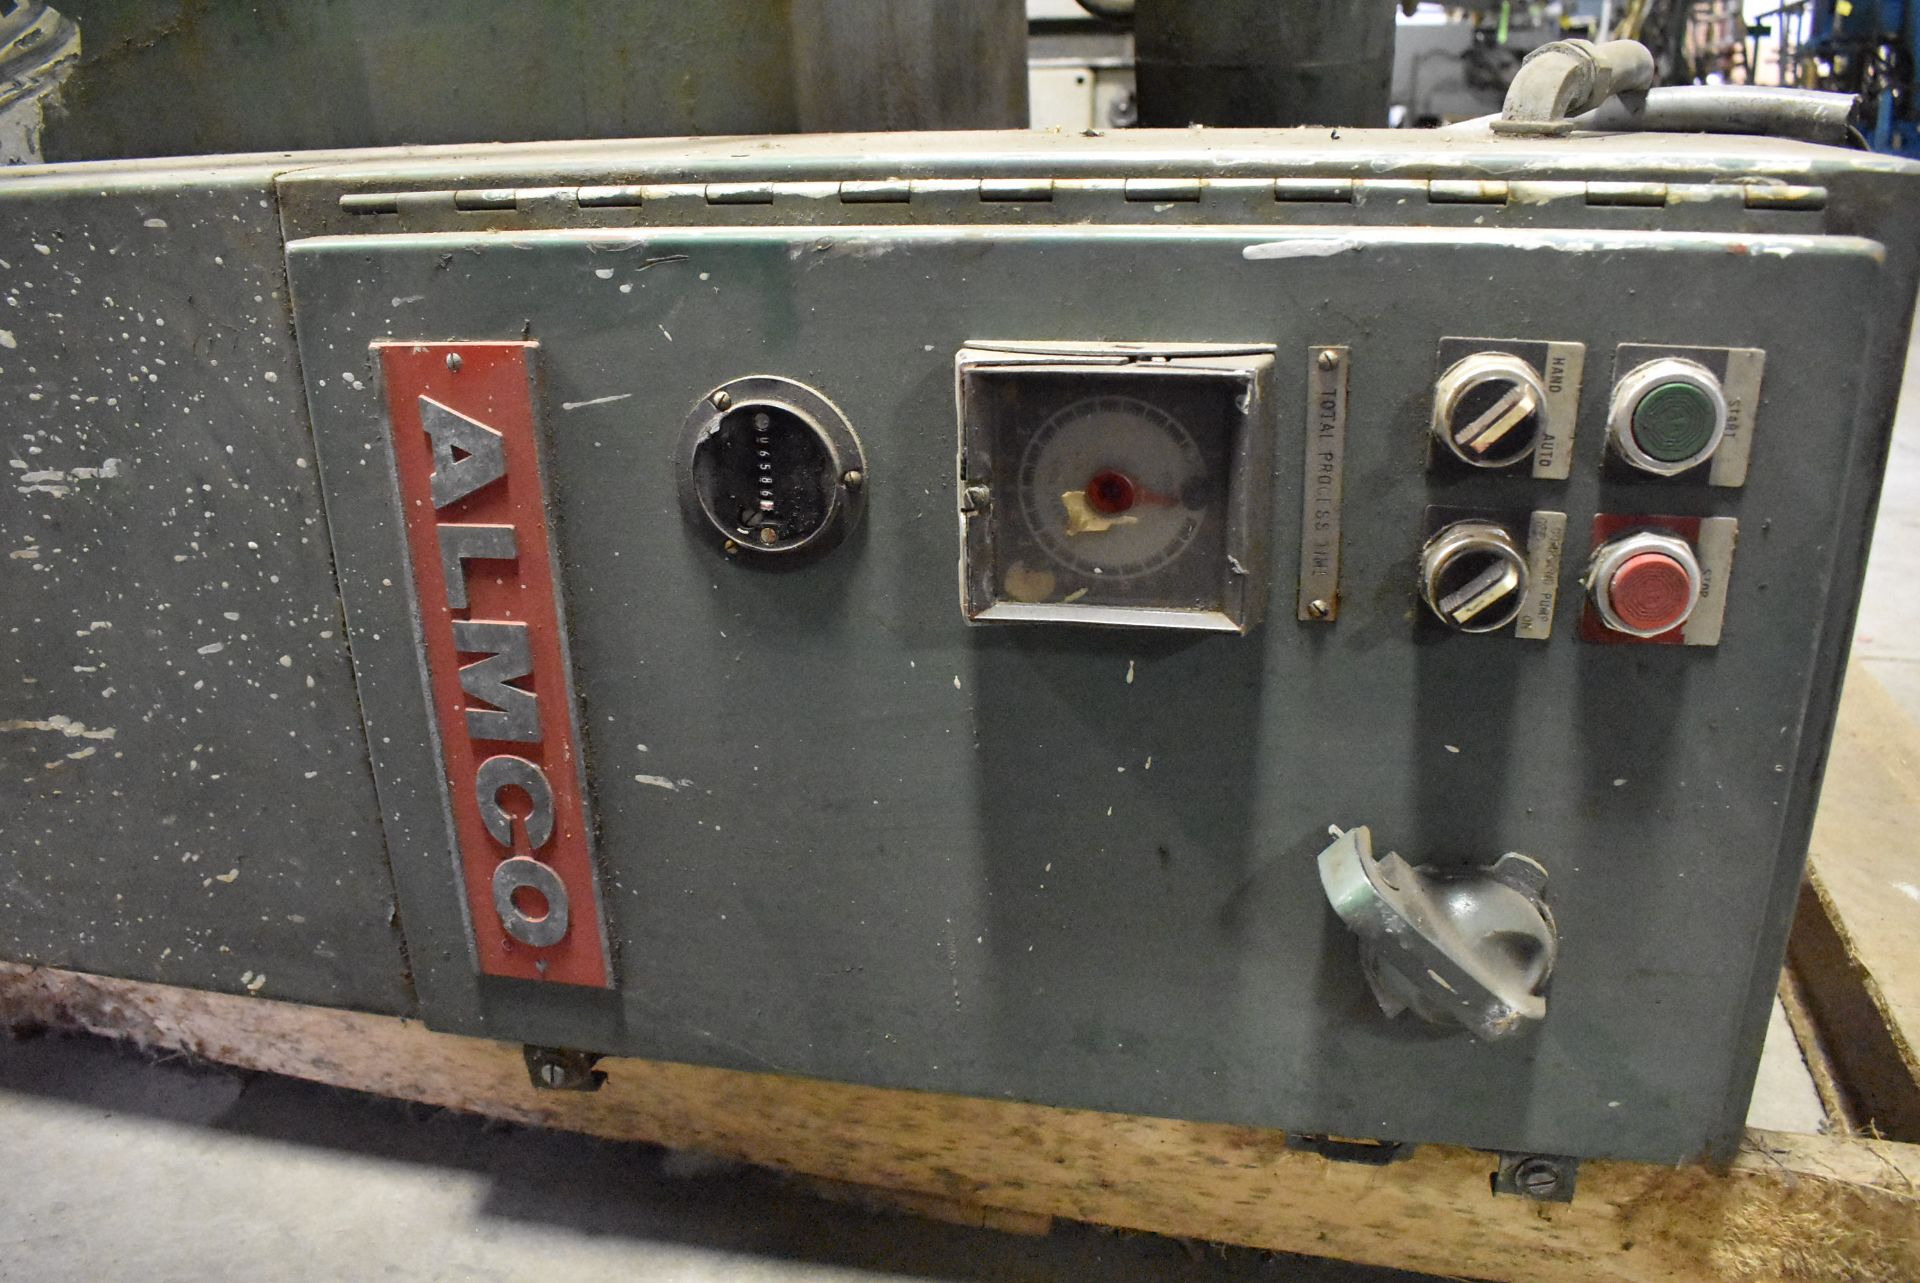 ALMCO MODEL OR-10V ROUND BOWL VIBRATORY DEBURRER S/N 108201, VARIABLE SPEED WITH CONTROLS, MEDIA - Image 10 of 11